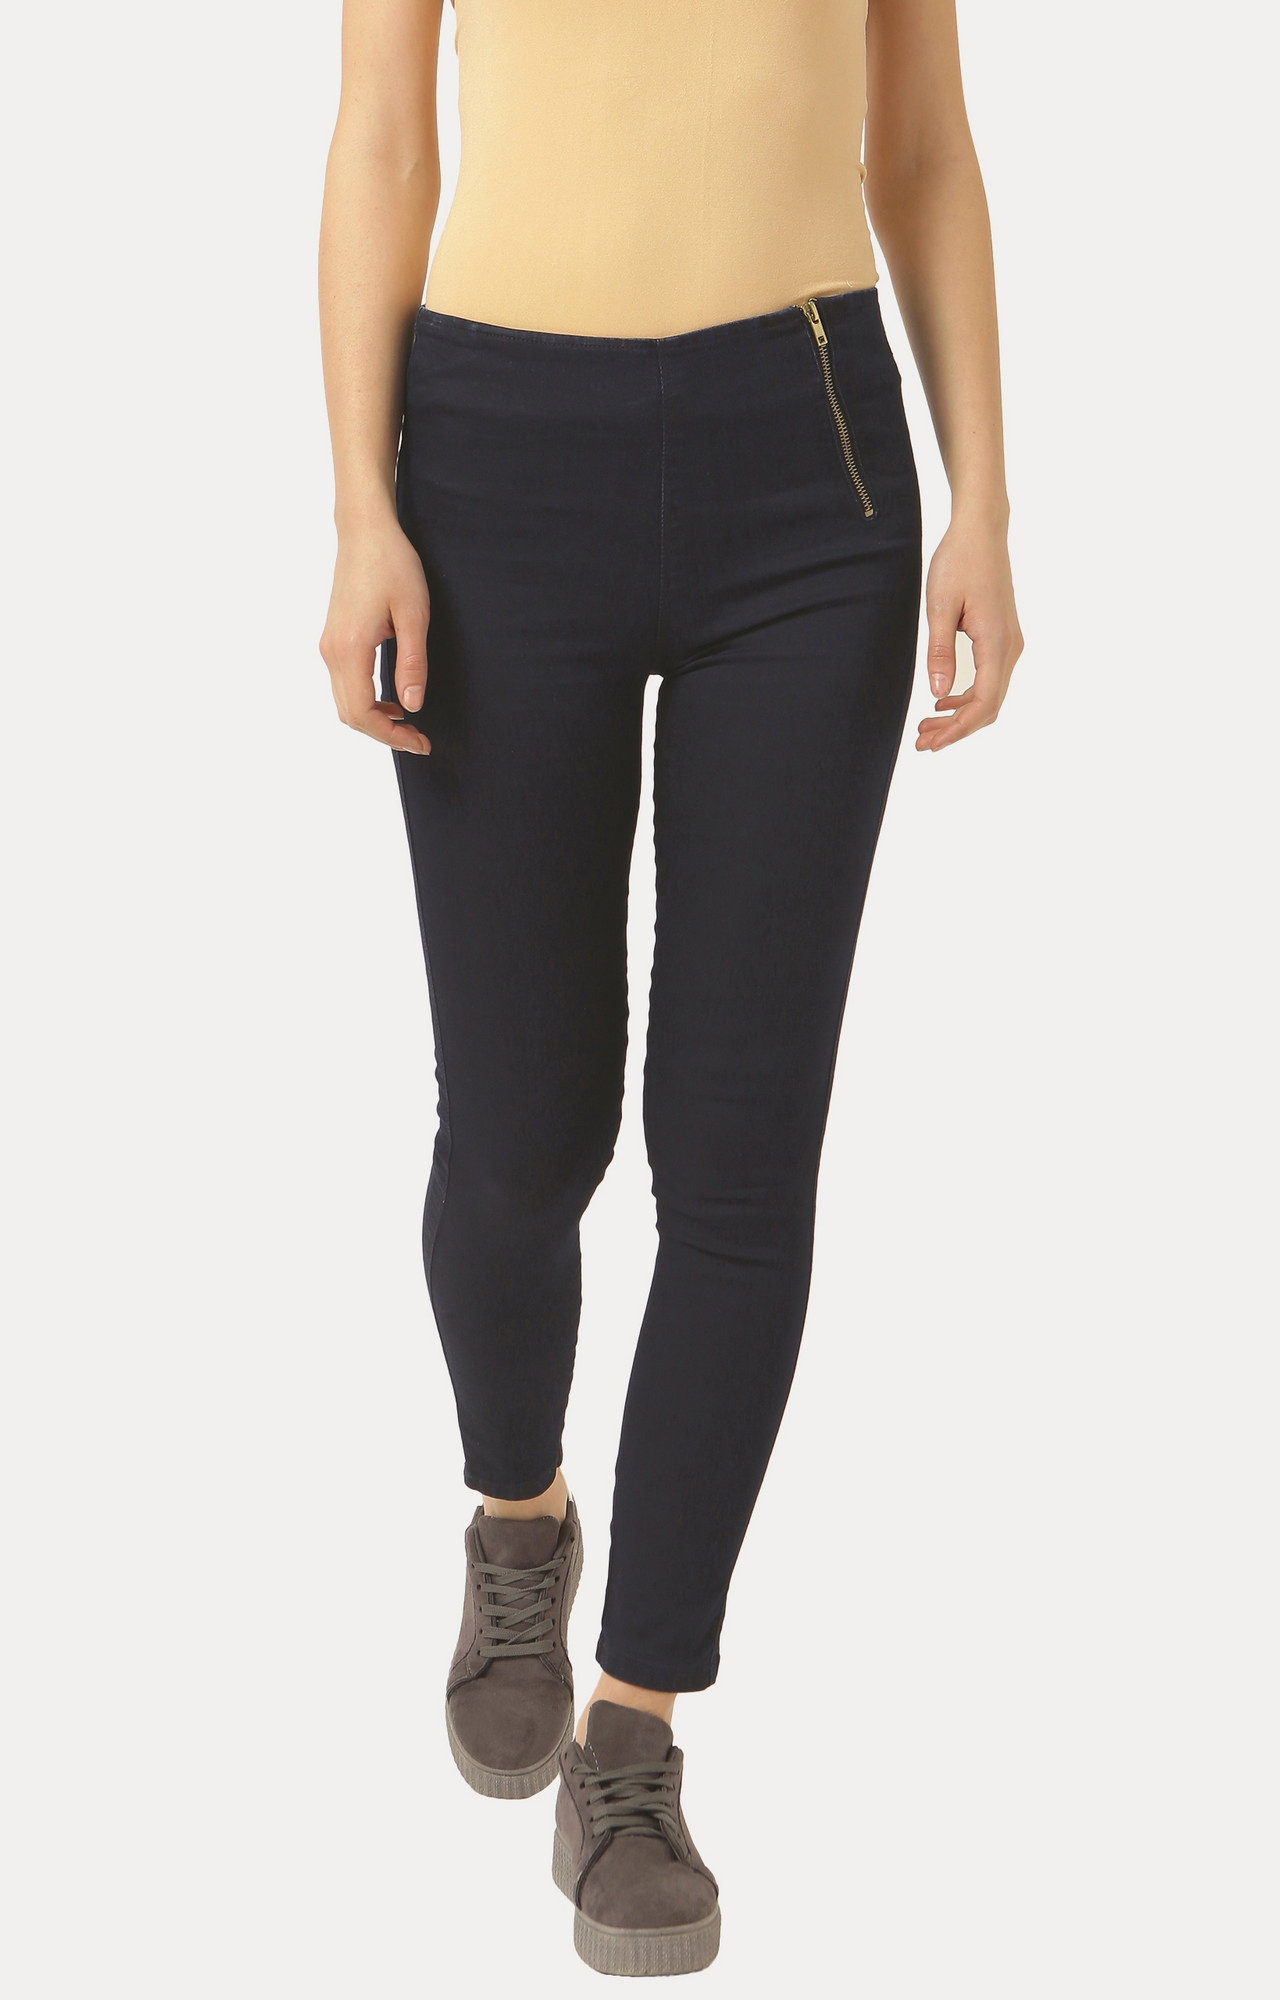 MISS CHASE | Navy Blue Super Skinny Fit Stretchable Jeggings